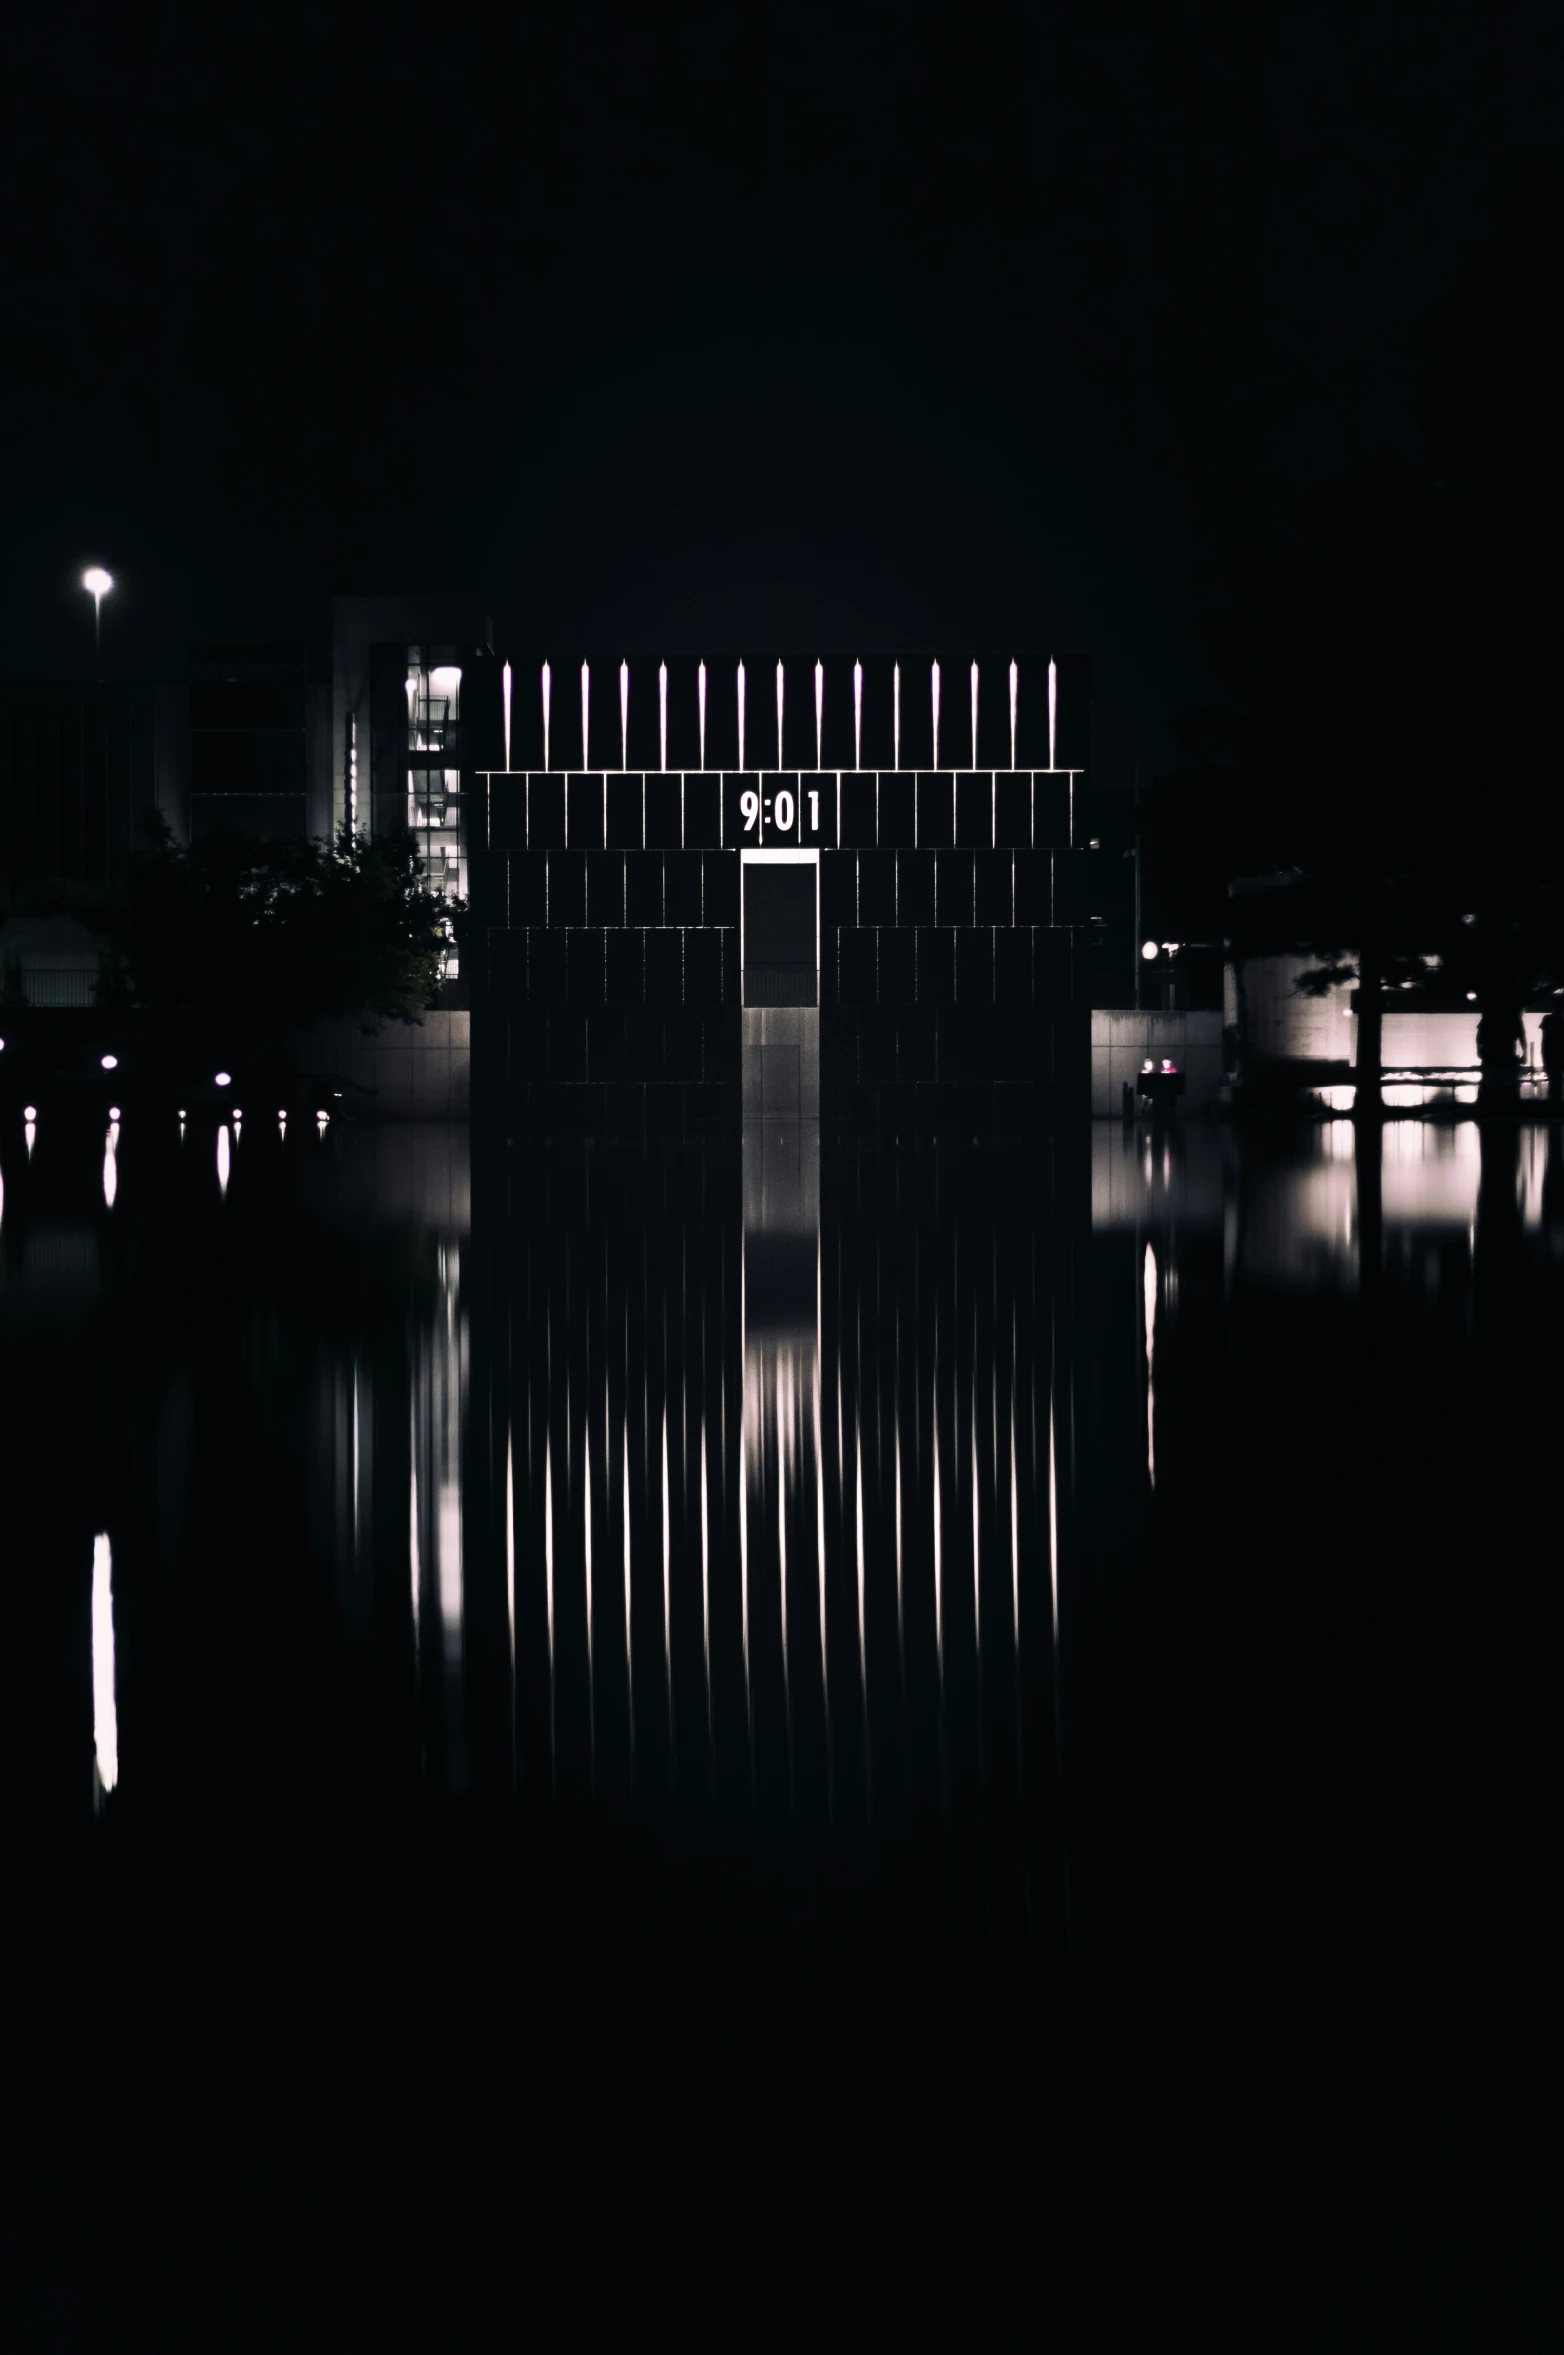 the front entrance to an illuminated building across water